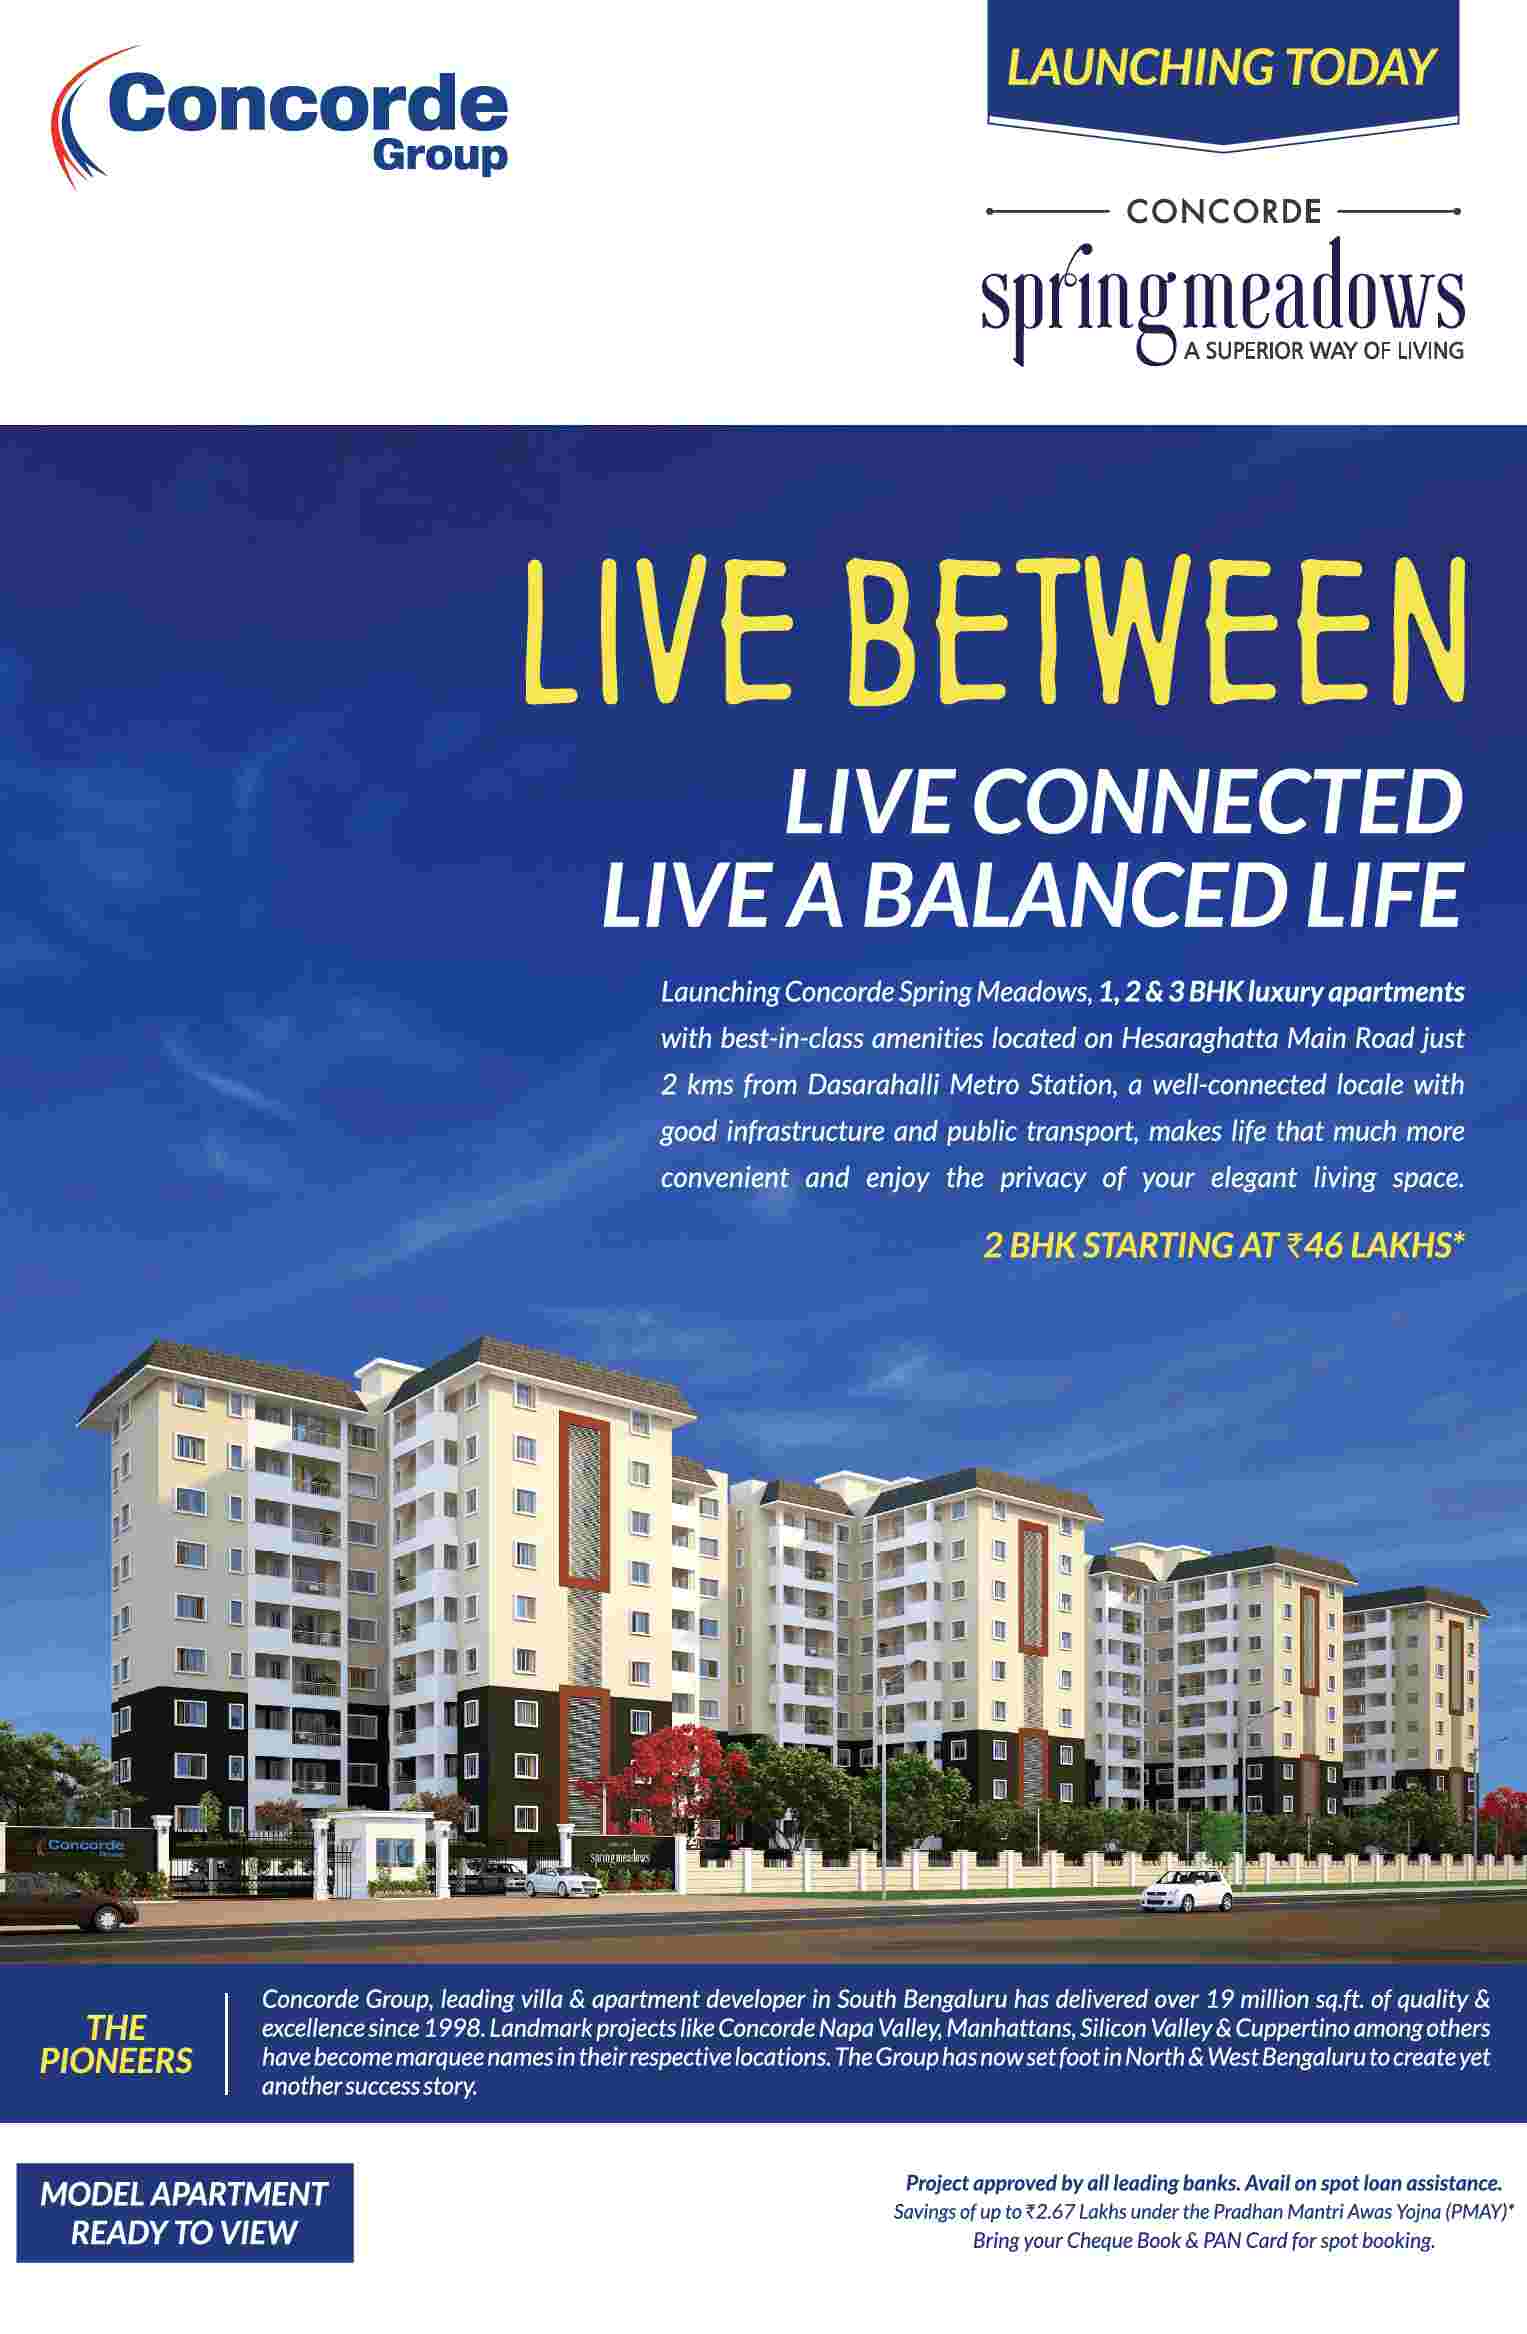 Model apartment ready to view at Concorde Spring Meadows in Bangalore